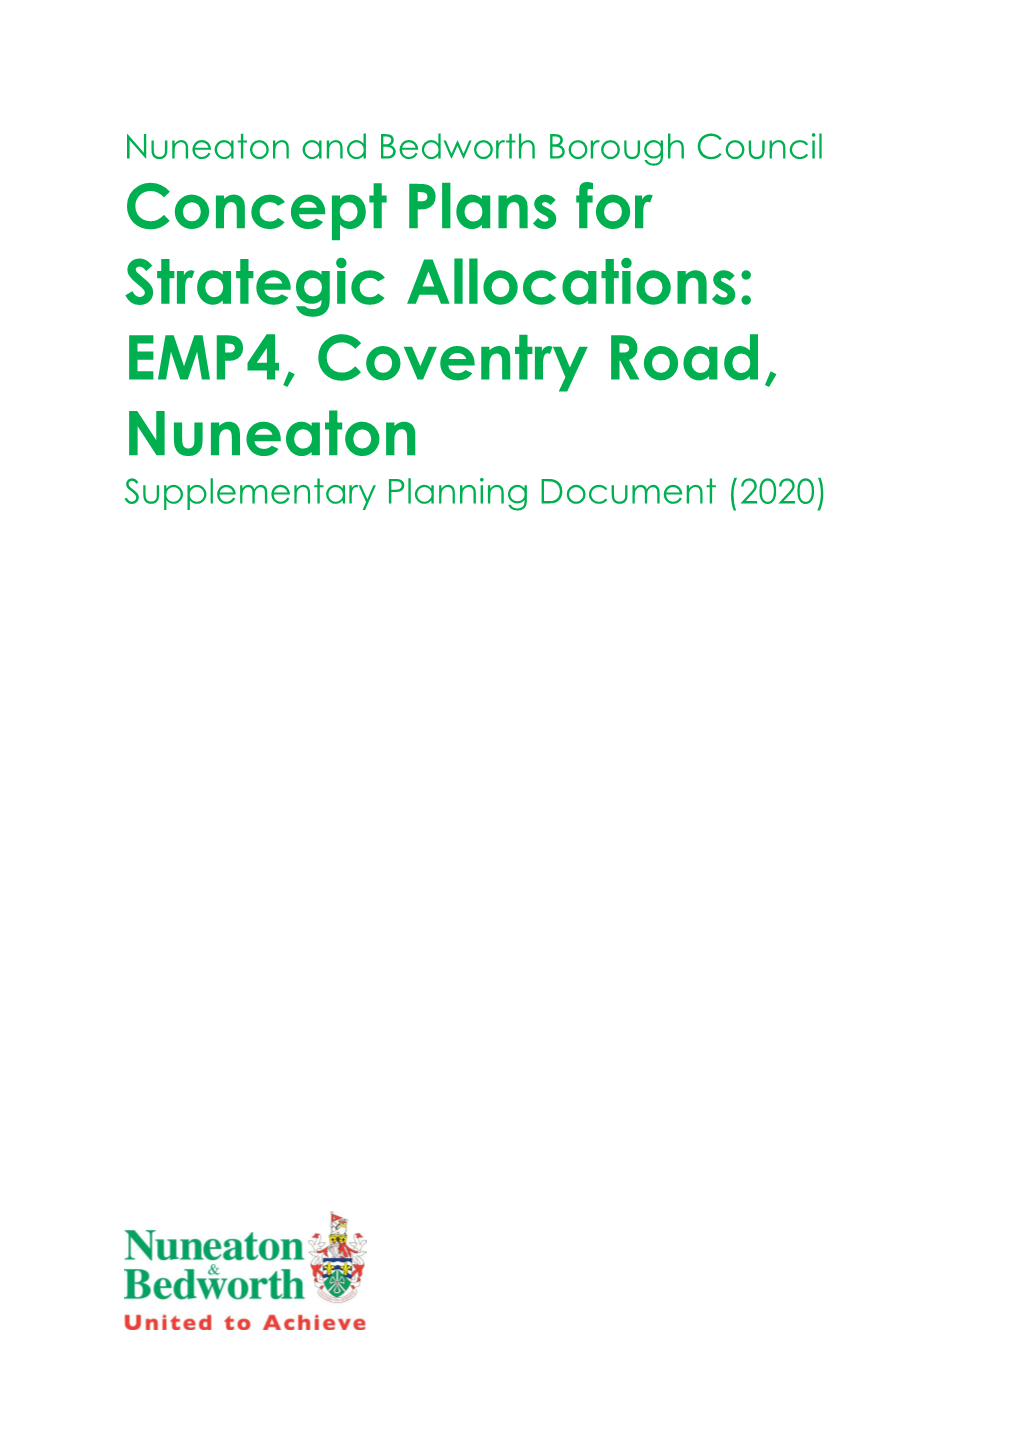 Concept Plans for Strategic Allocations: EMP4, Coventry Road, Nuneaton Supplementary Planning Document (2020)